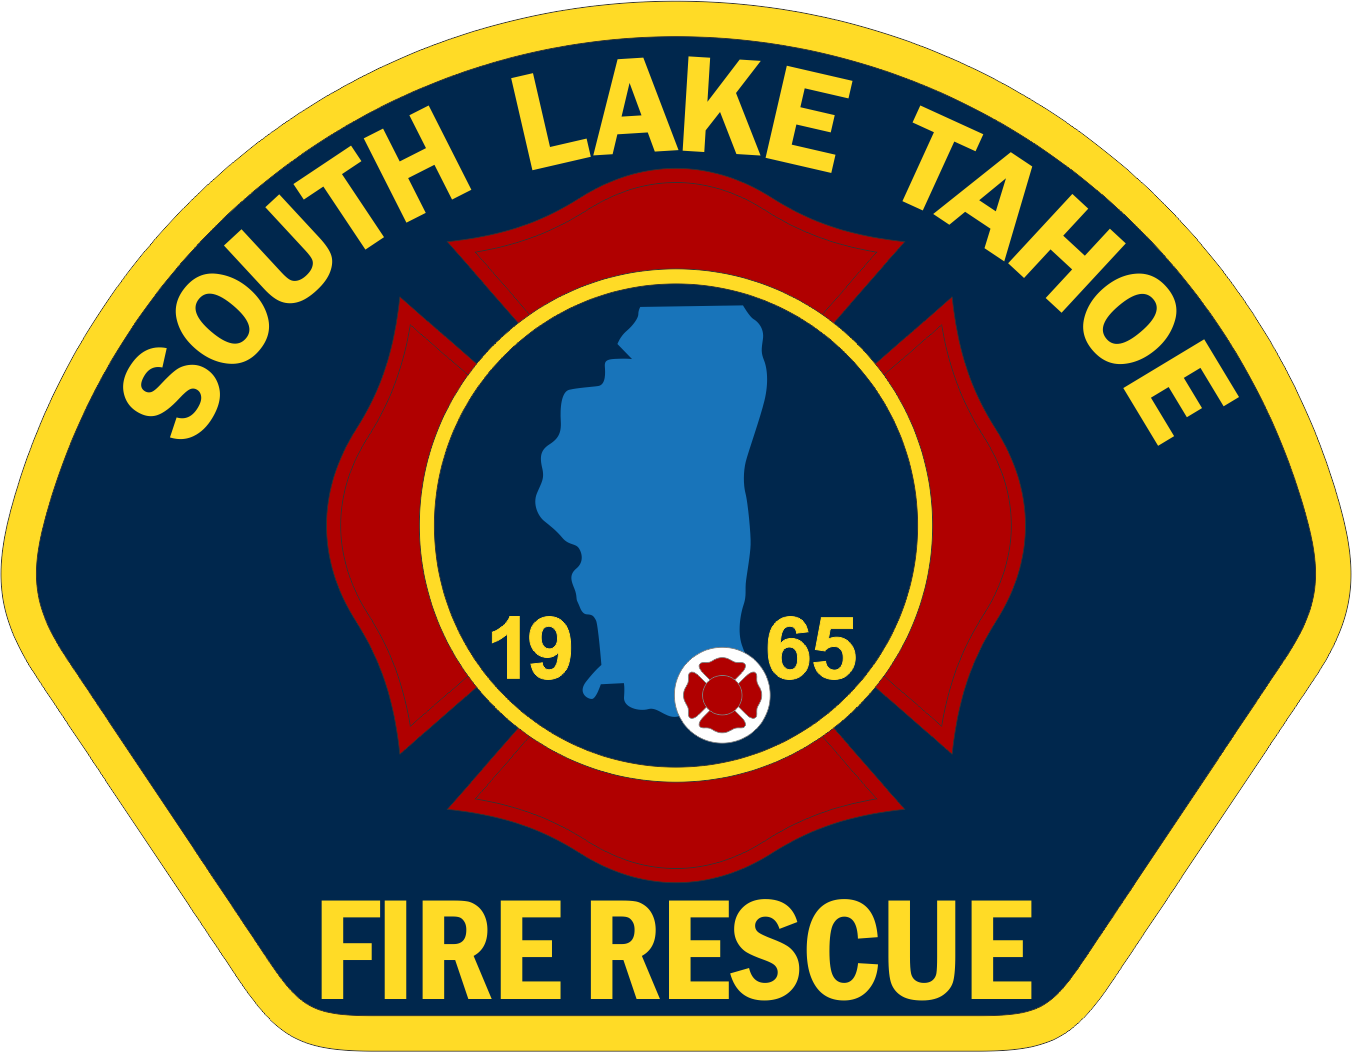 South Lake Tahoe Fire Department – 3886